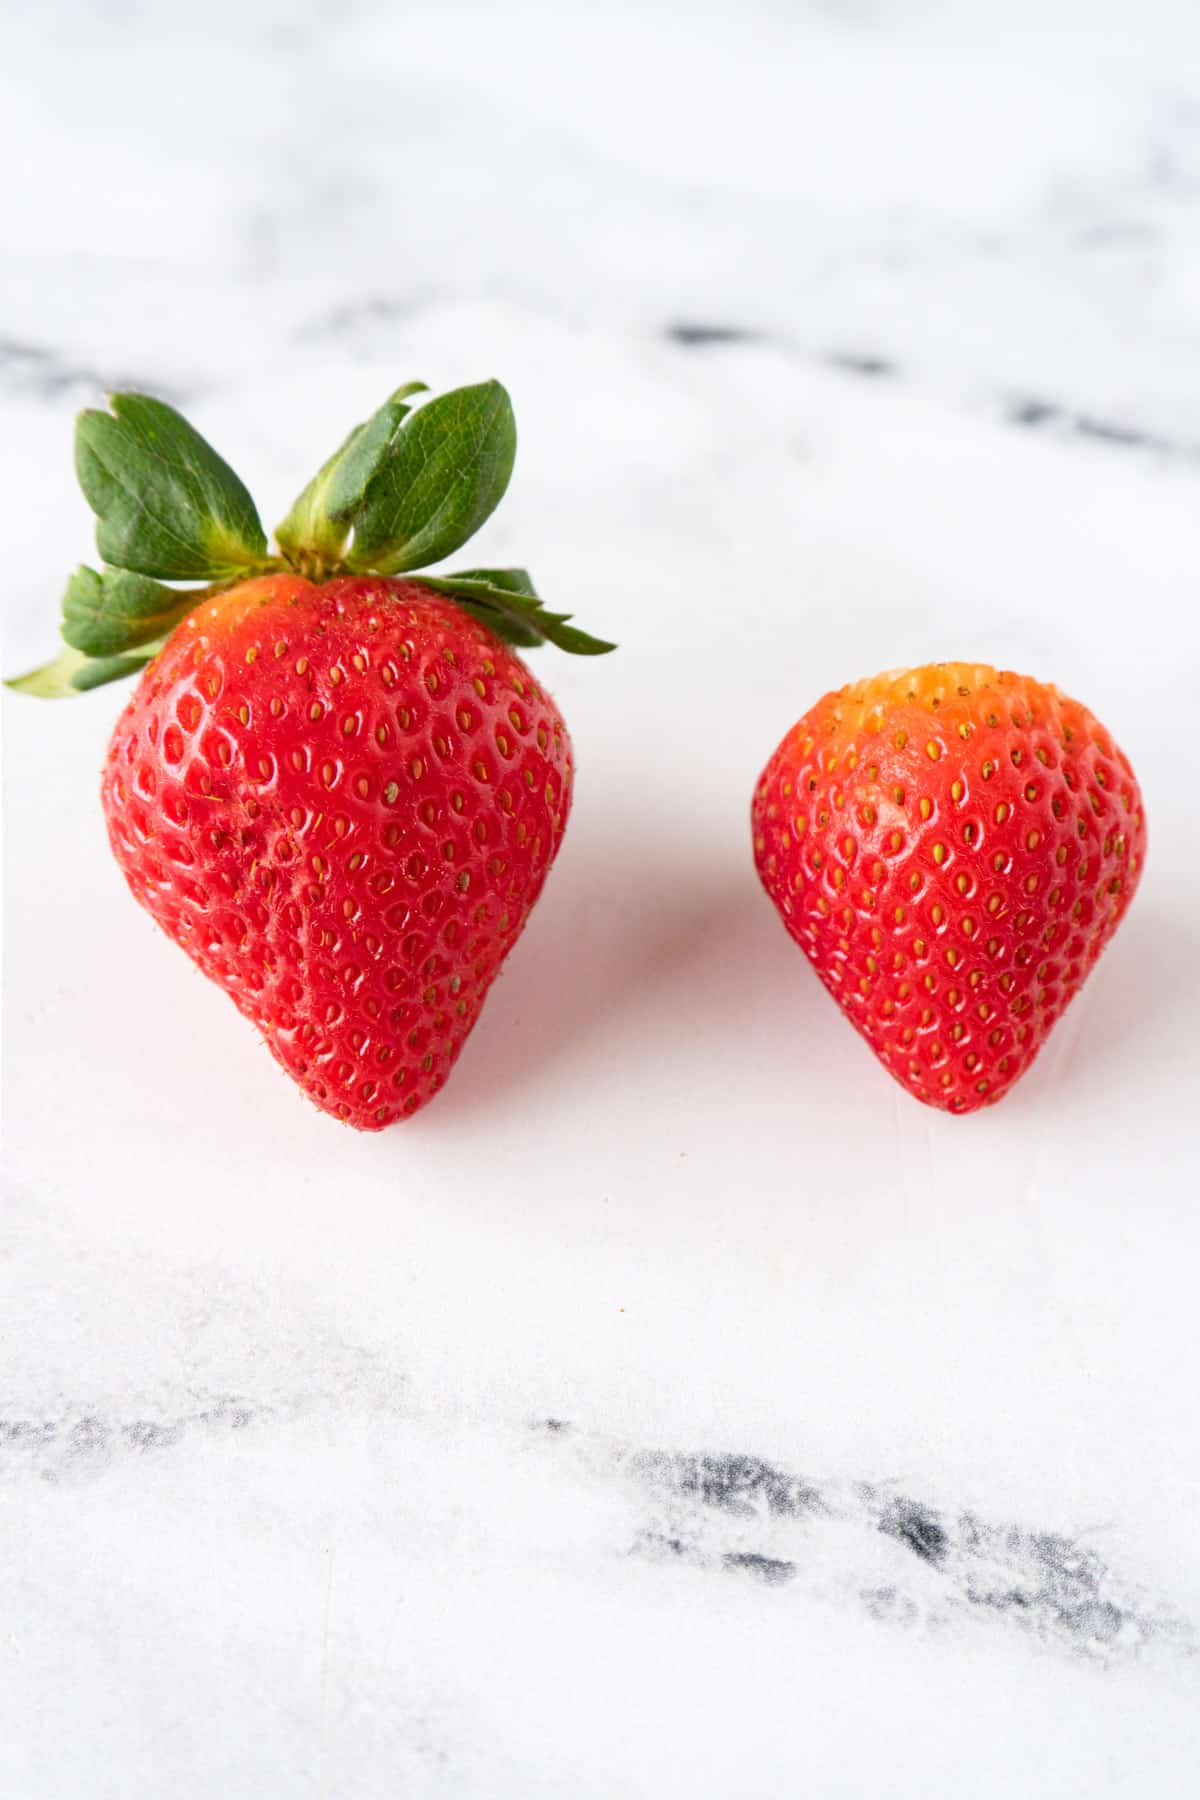 strawberries with and without green tops